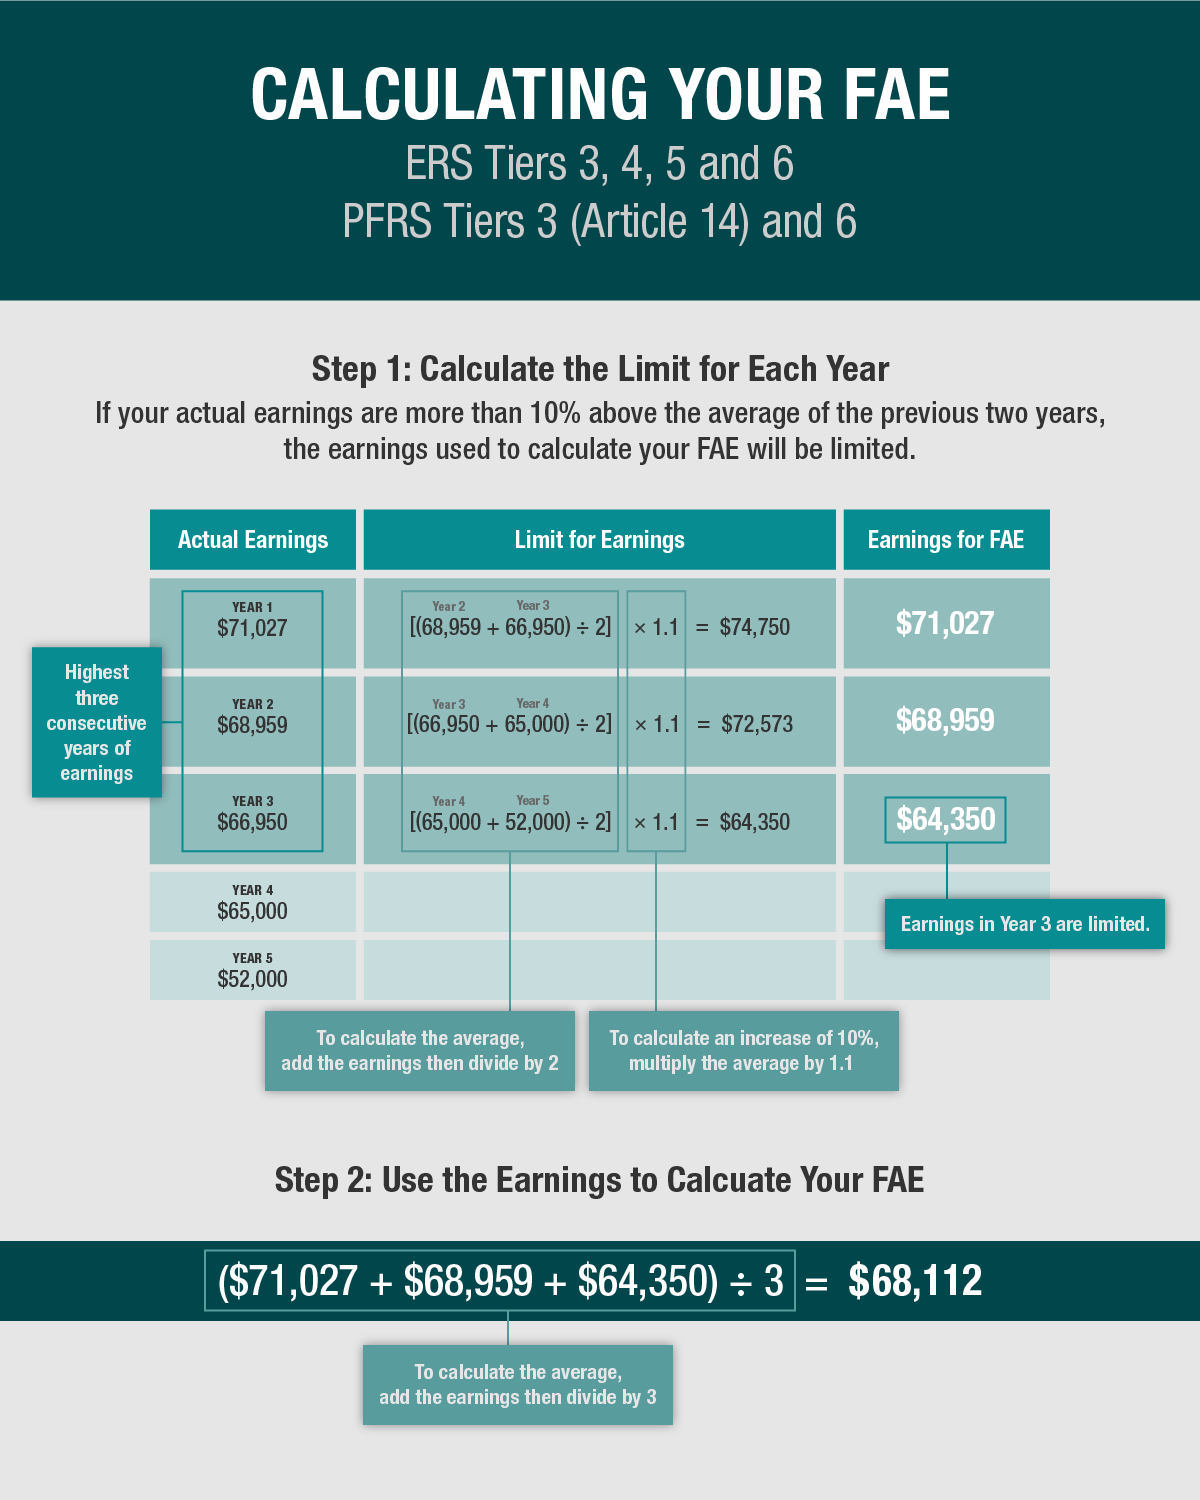 Calculating Your Final Average Earnings